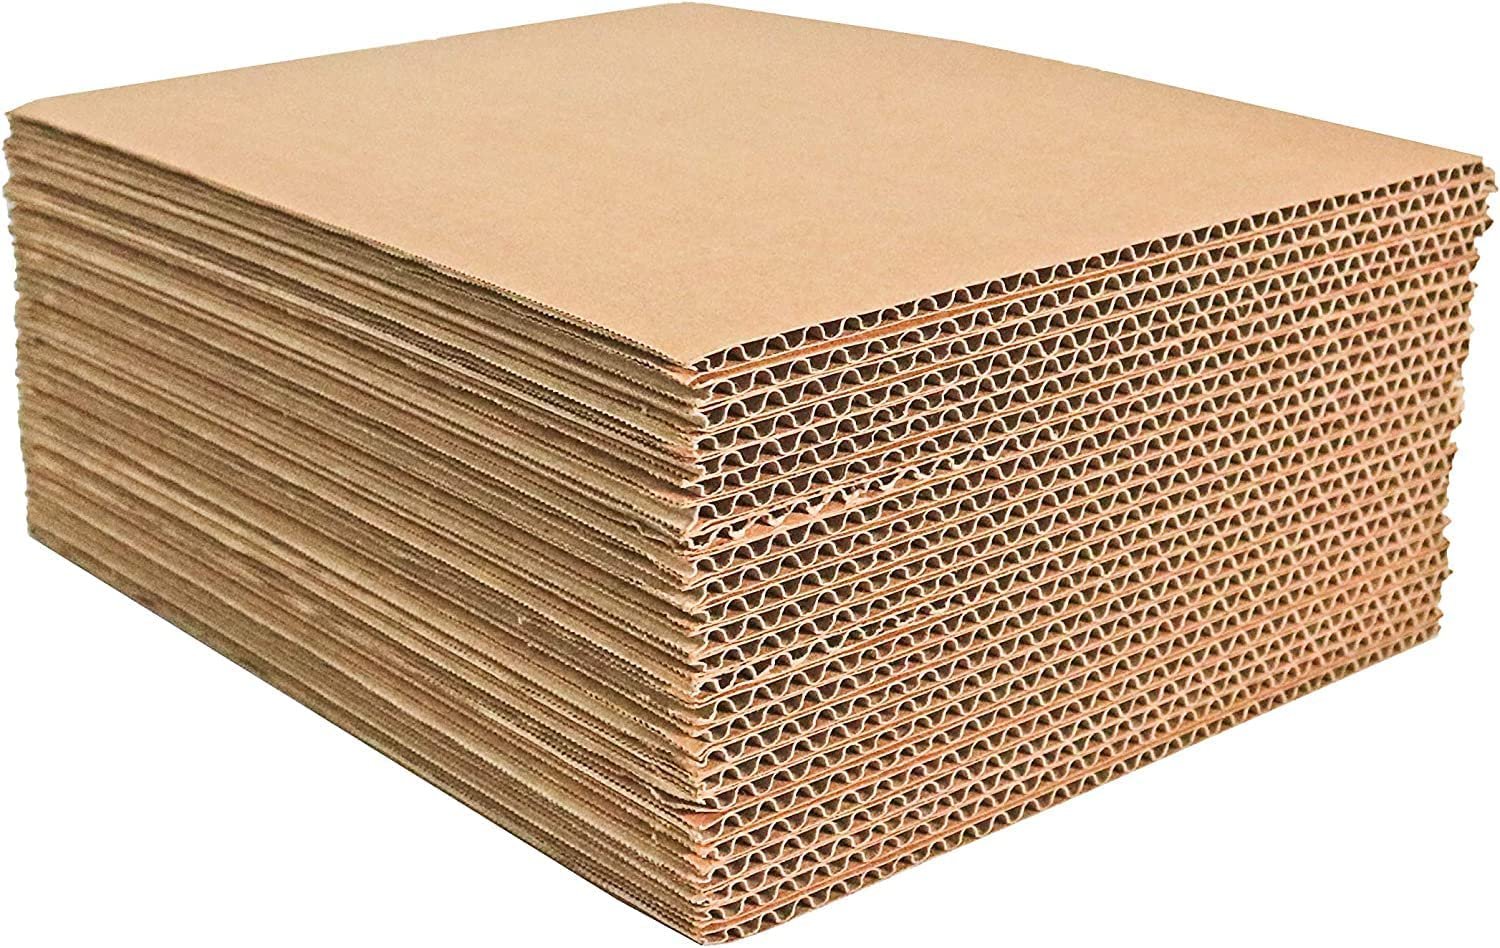 50-Pack of Corrugated Cardboard Sheets 9x12, Flat Card Boards, Packaging  Inserts for Shipping, Mailing, Arts and Crafts, DIY Projects, Packing